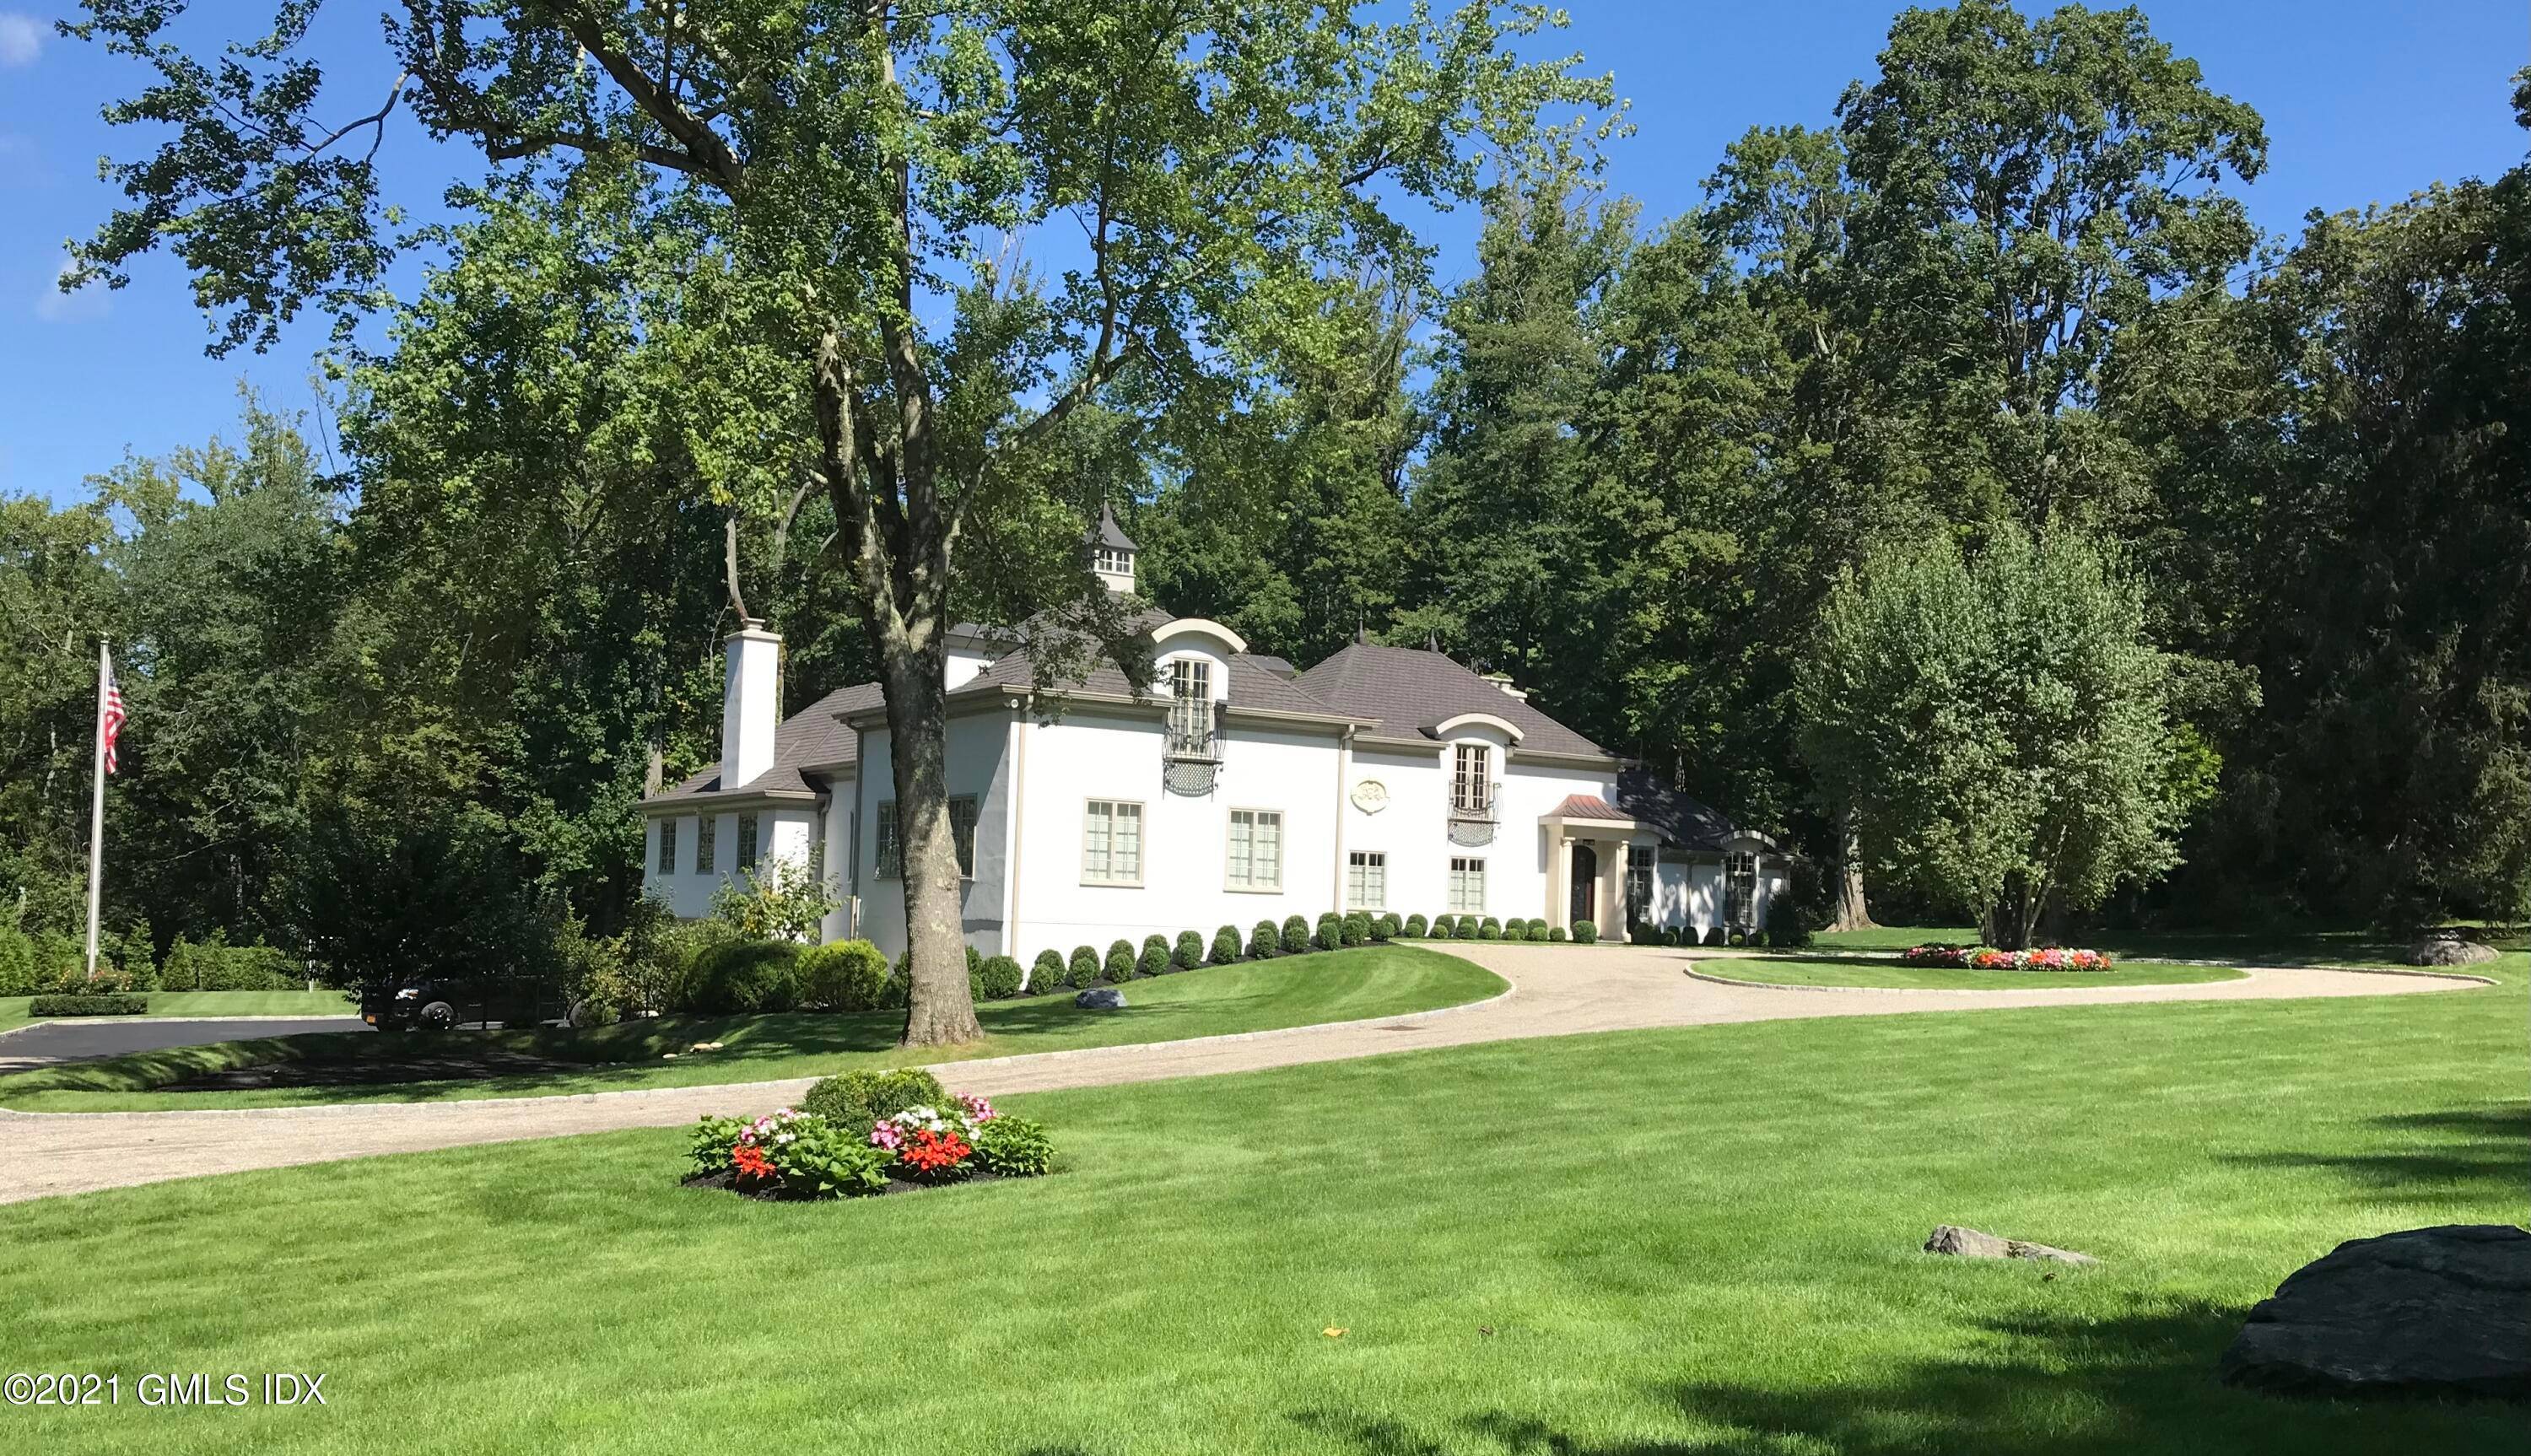 The sensational renovation and makeover, inside and out, created a charming European flair to this beautiful house in a 4 acre picturesque setting on a quiet street in back country ...